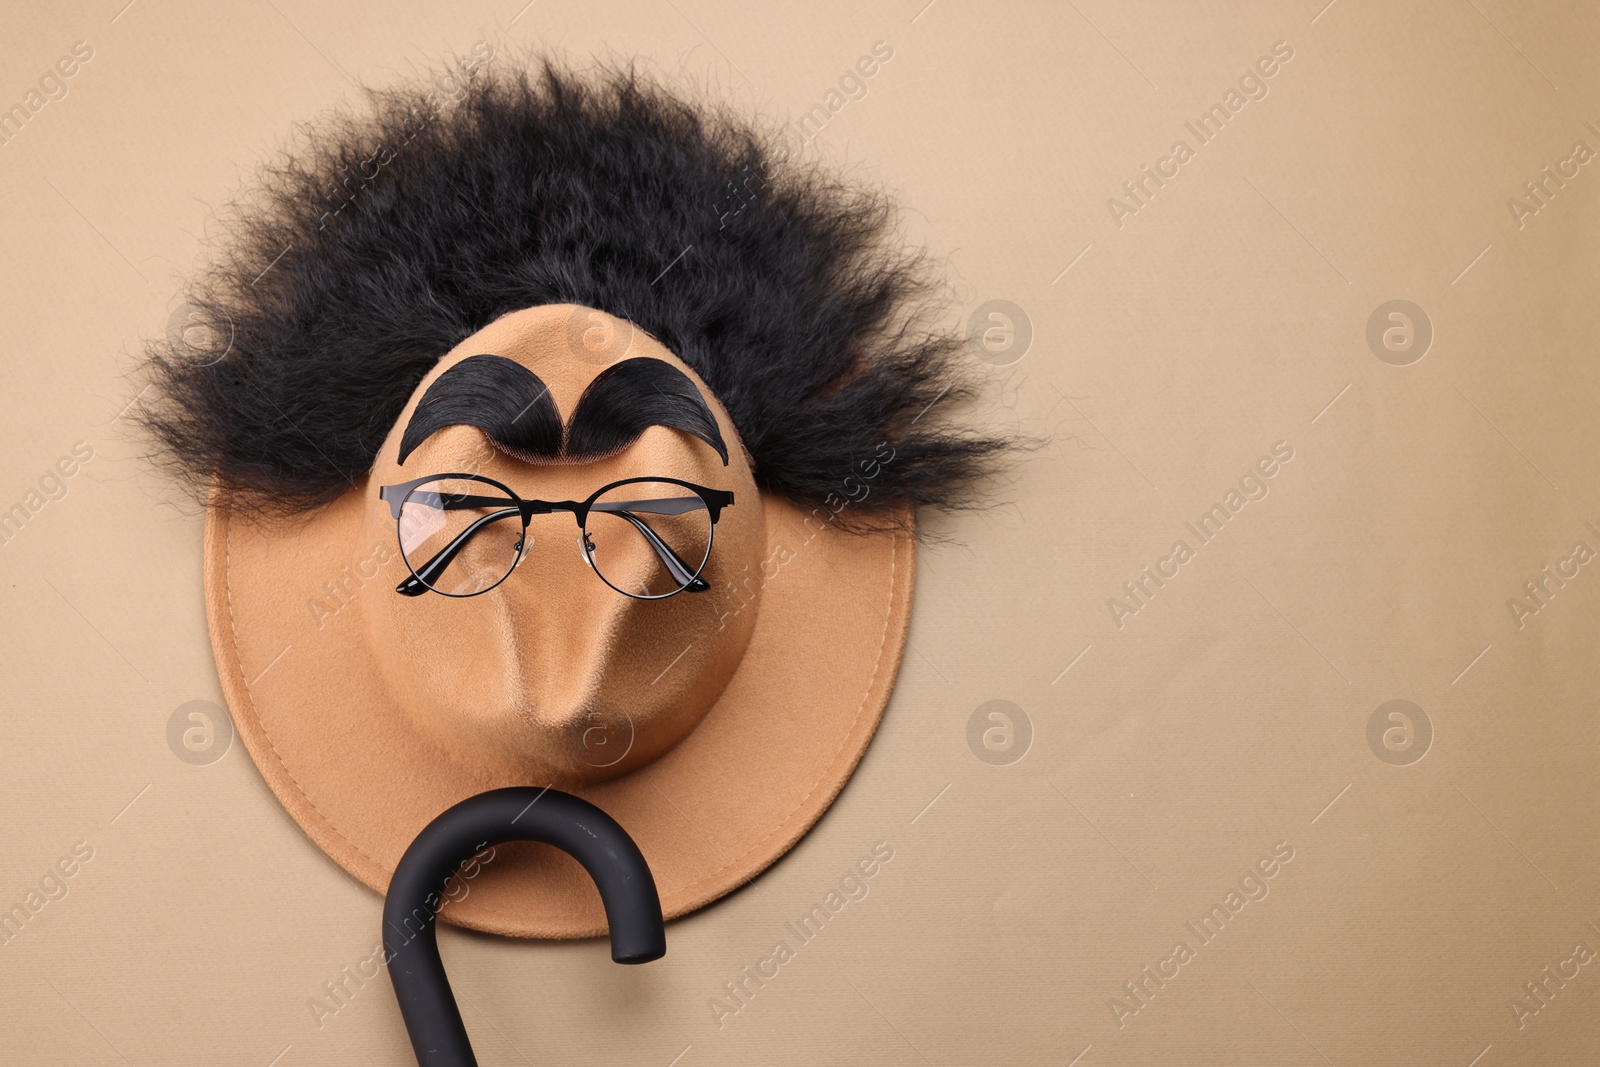 Photo of Man's face made of artificial hair, eyebrows, glasses and hat on beige background, top view. Space for text